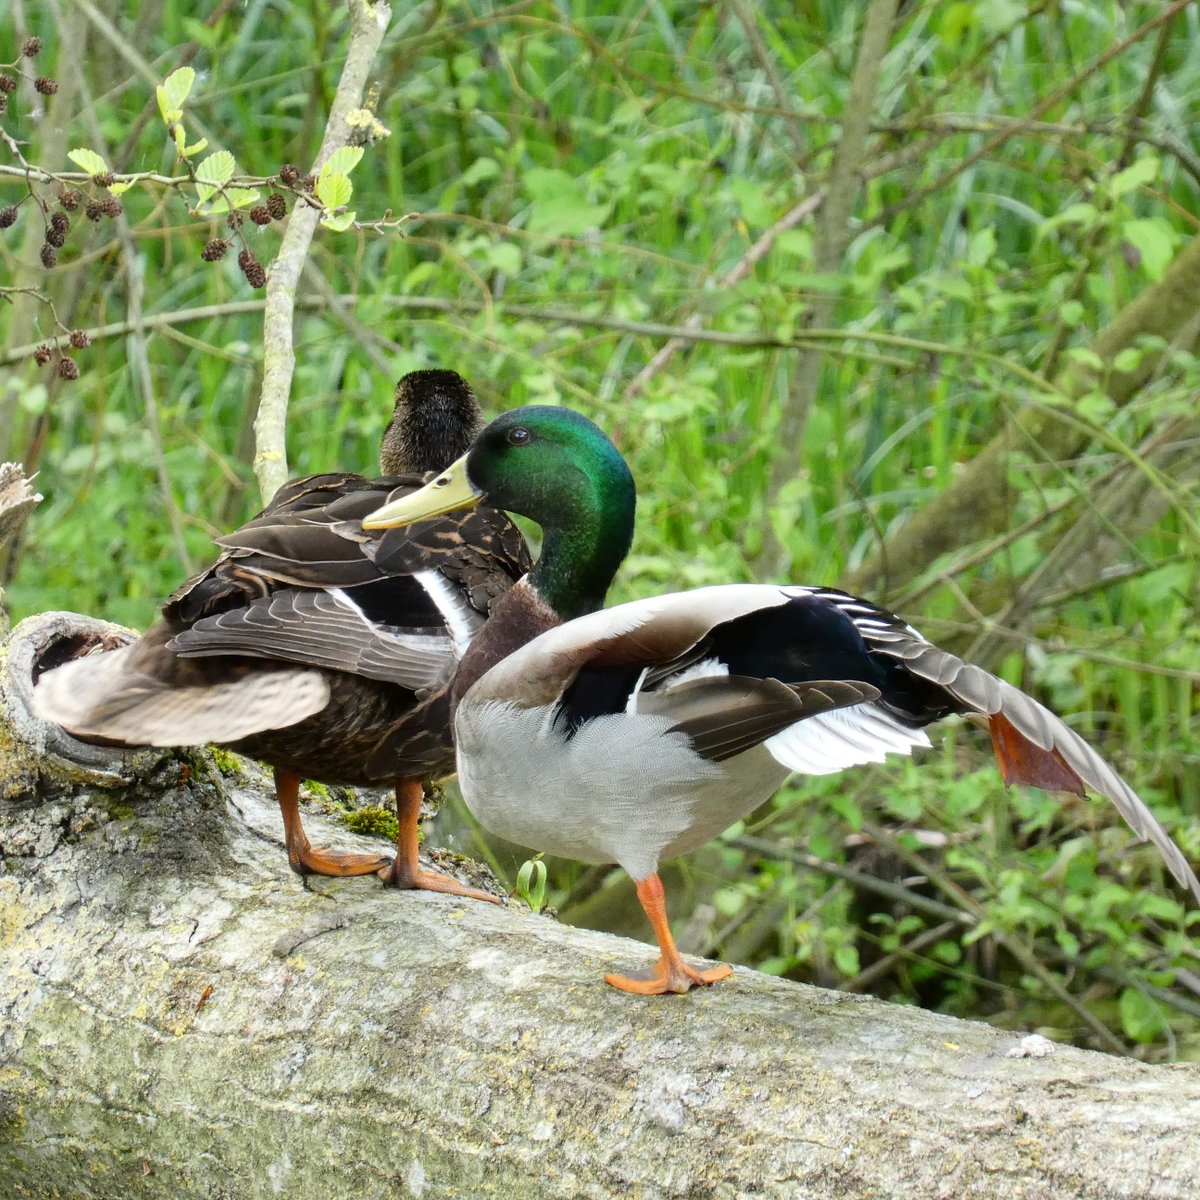 On a branch so low,
A #mallard made a show.
With a rising paw,
He danced, much to my awe.

🦆

#NaturePhotography #NaturePhoto #naturelovers #naturesbeauty #NatureSpeaks #NatureEnthusiast #BirdPhotography #ducks #AnasPlatyrhynchos #photo #photos #photography #自然 #真鴨 #マガモ